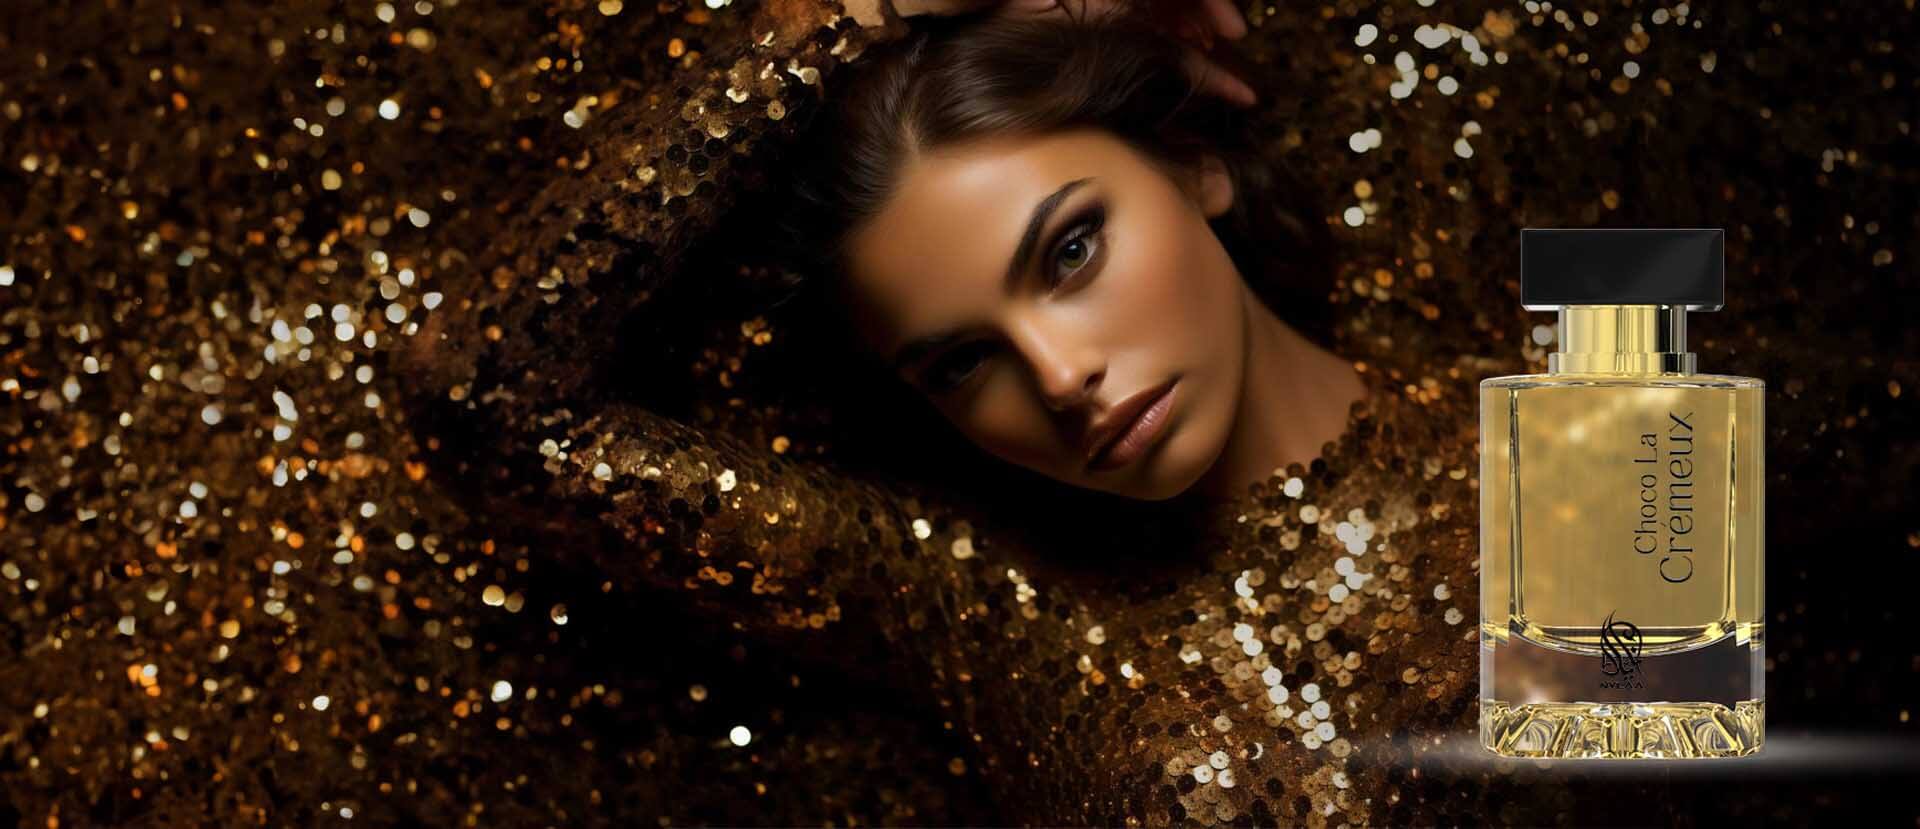 A woman wearing a glittery golden dress with perfume by Savia Exclusive